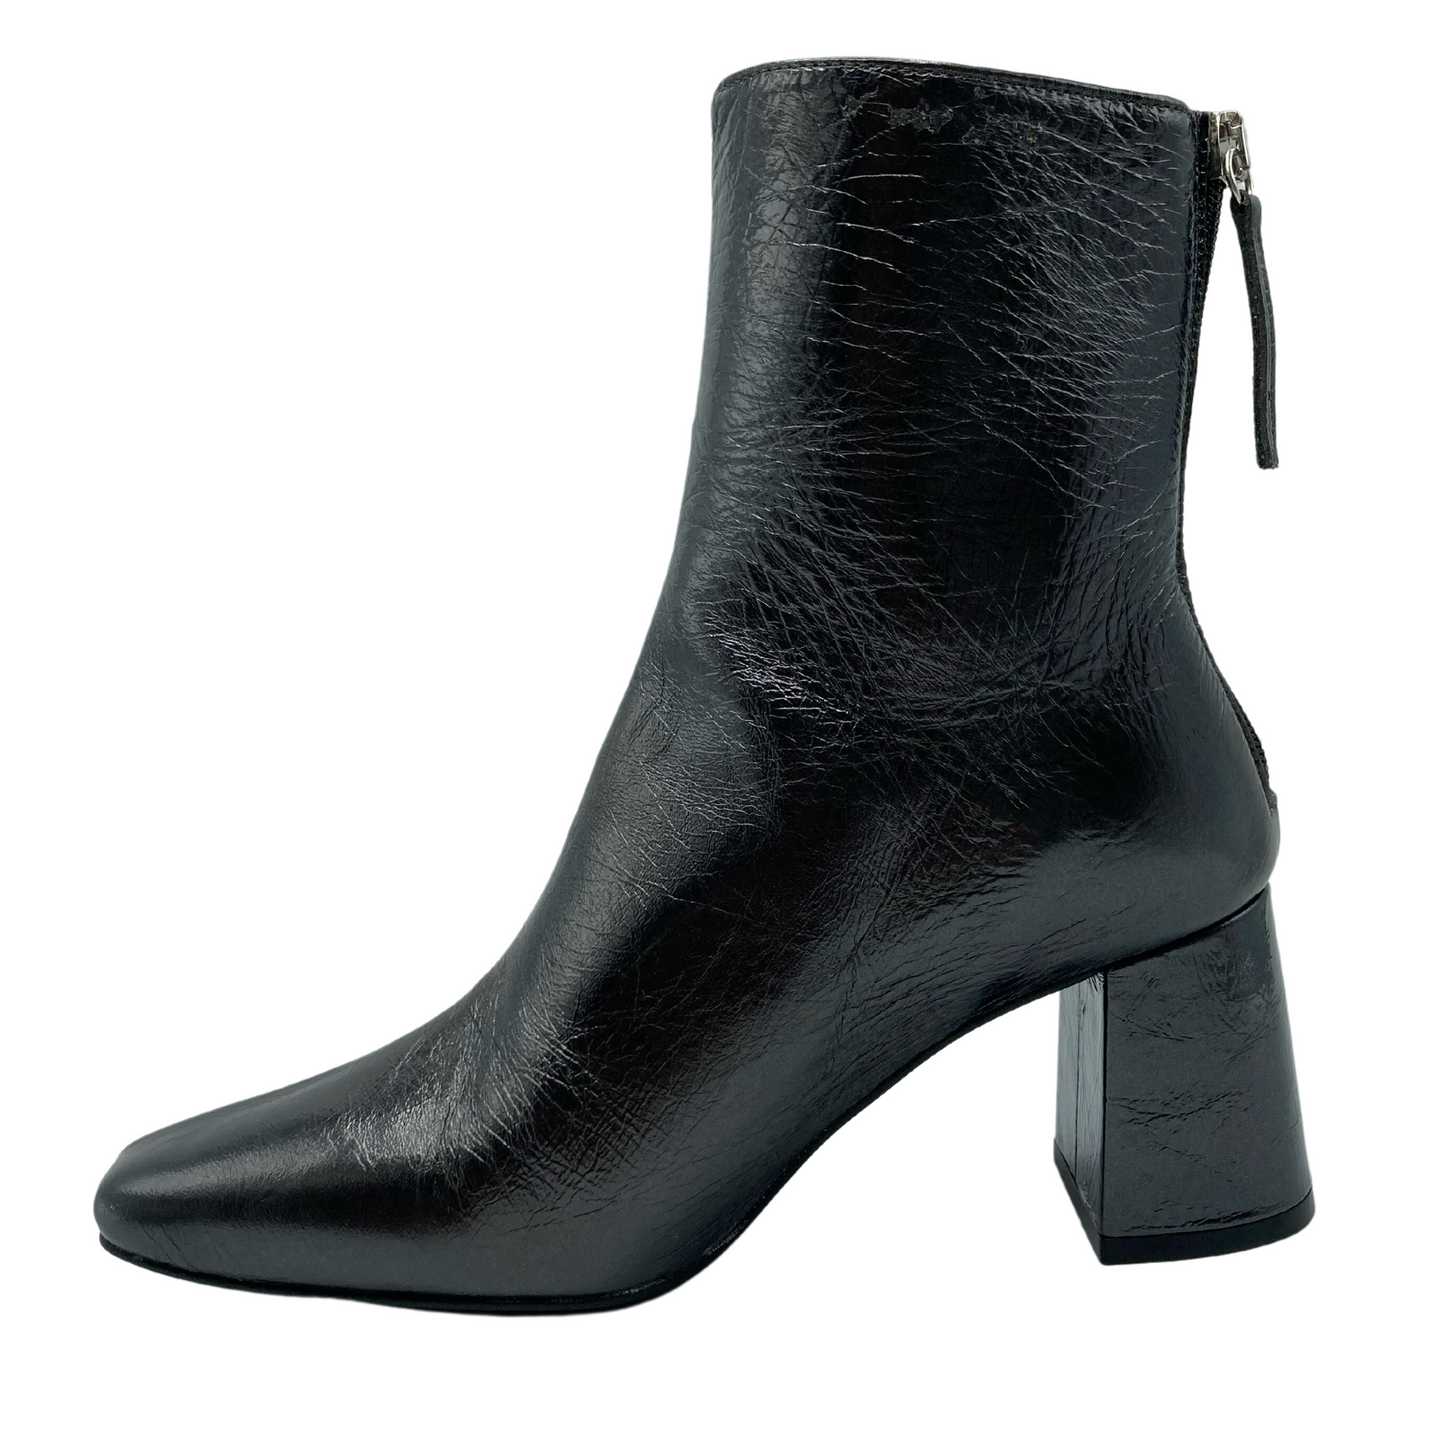 Left facing view of textured leather short boot with block heel and back zipper closure